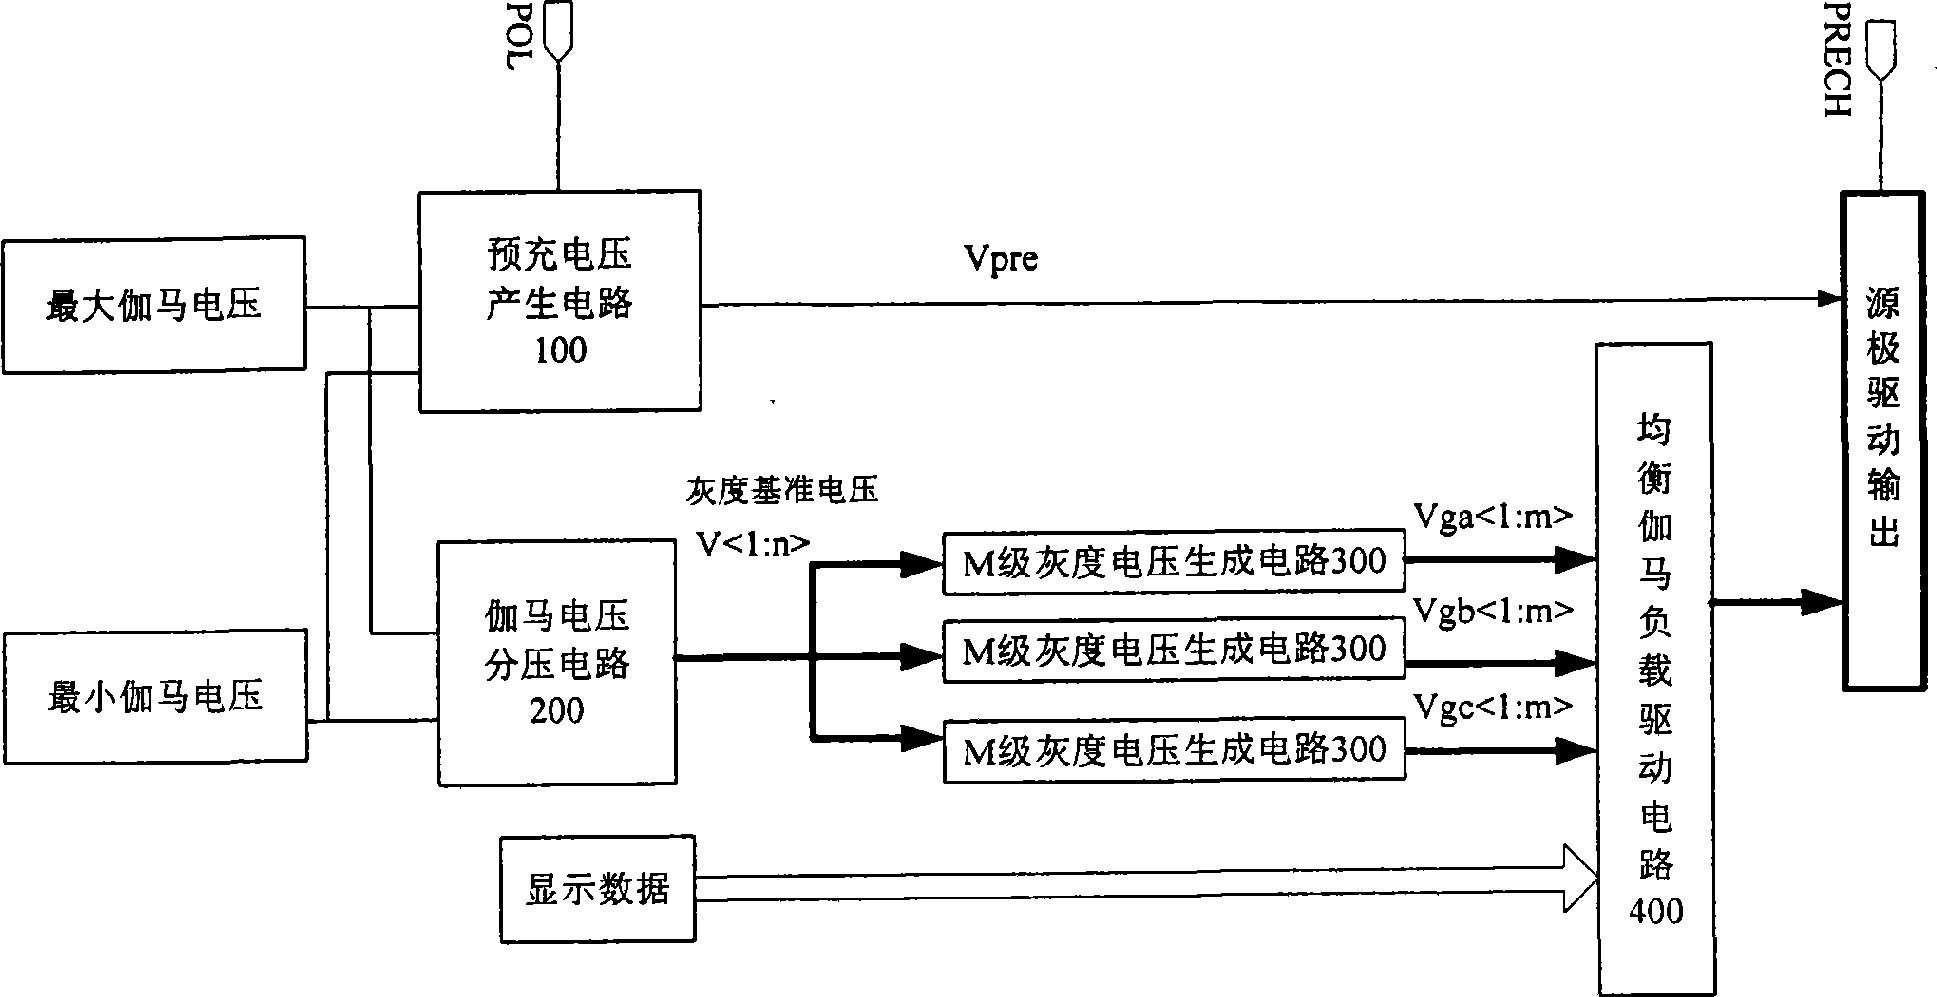 Method for implementing liquid crystal display drive circuit and source pole drive circuit module